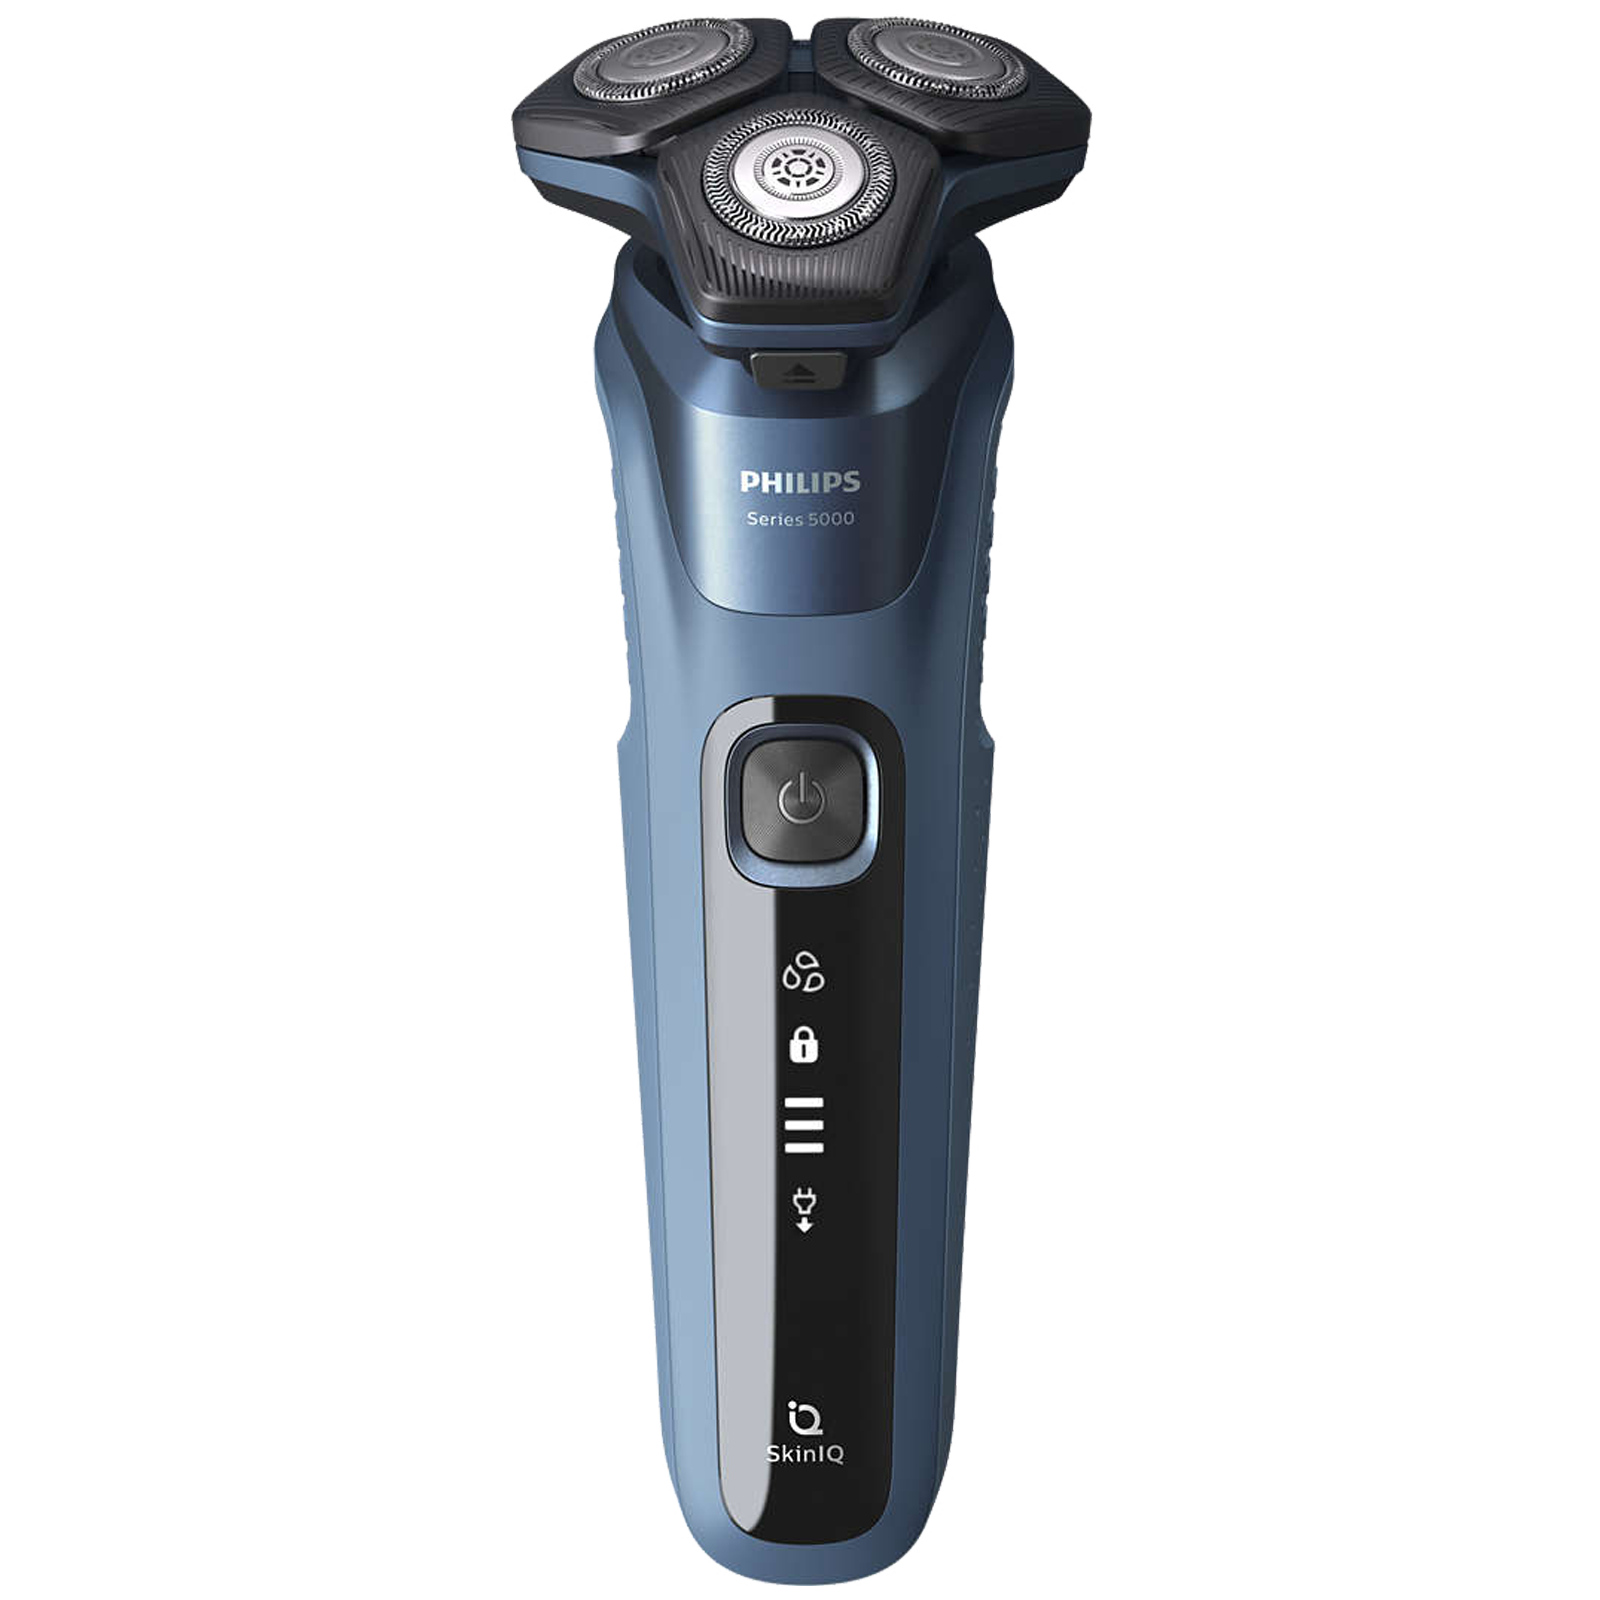 philips - philips Series 5000 Stainless Steel Blades Cordless Shaver (Travel Lock, S5582/20, Ocean Blue)